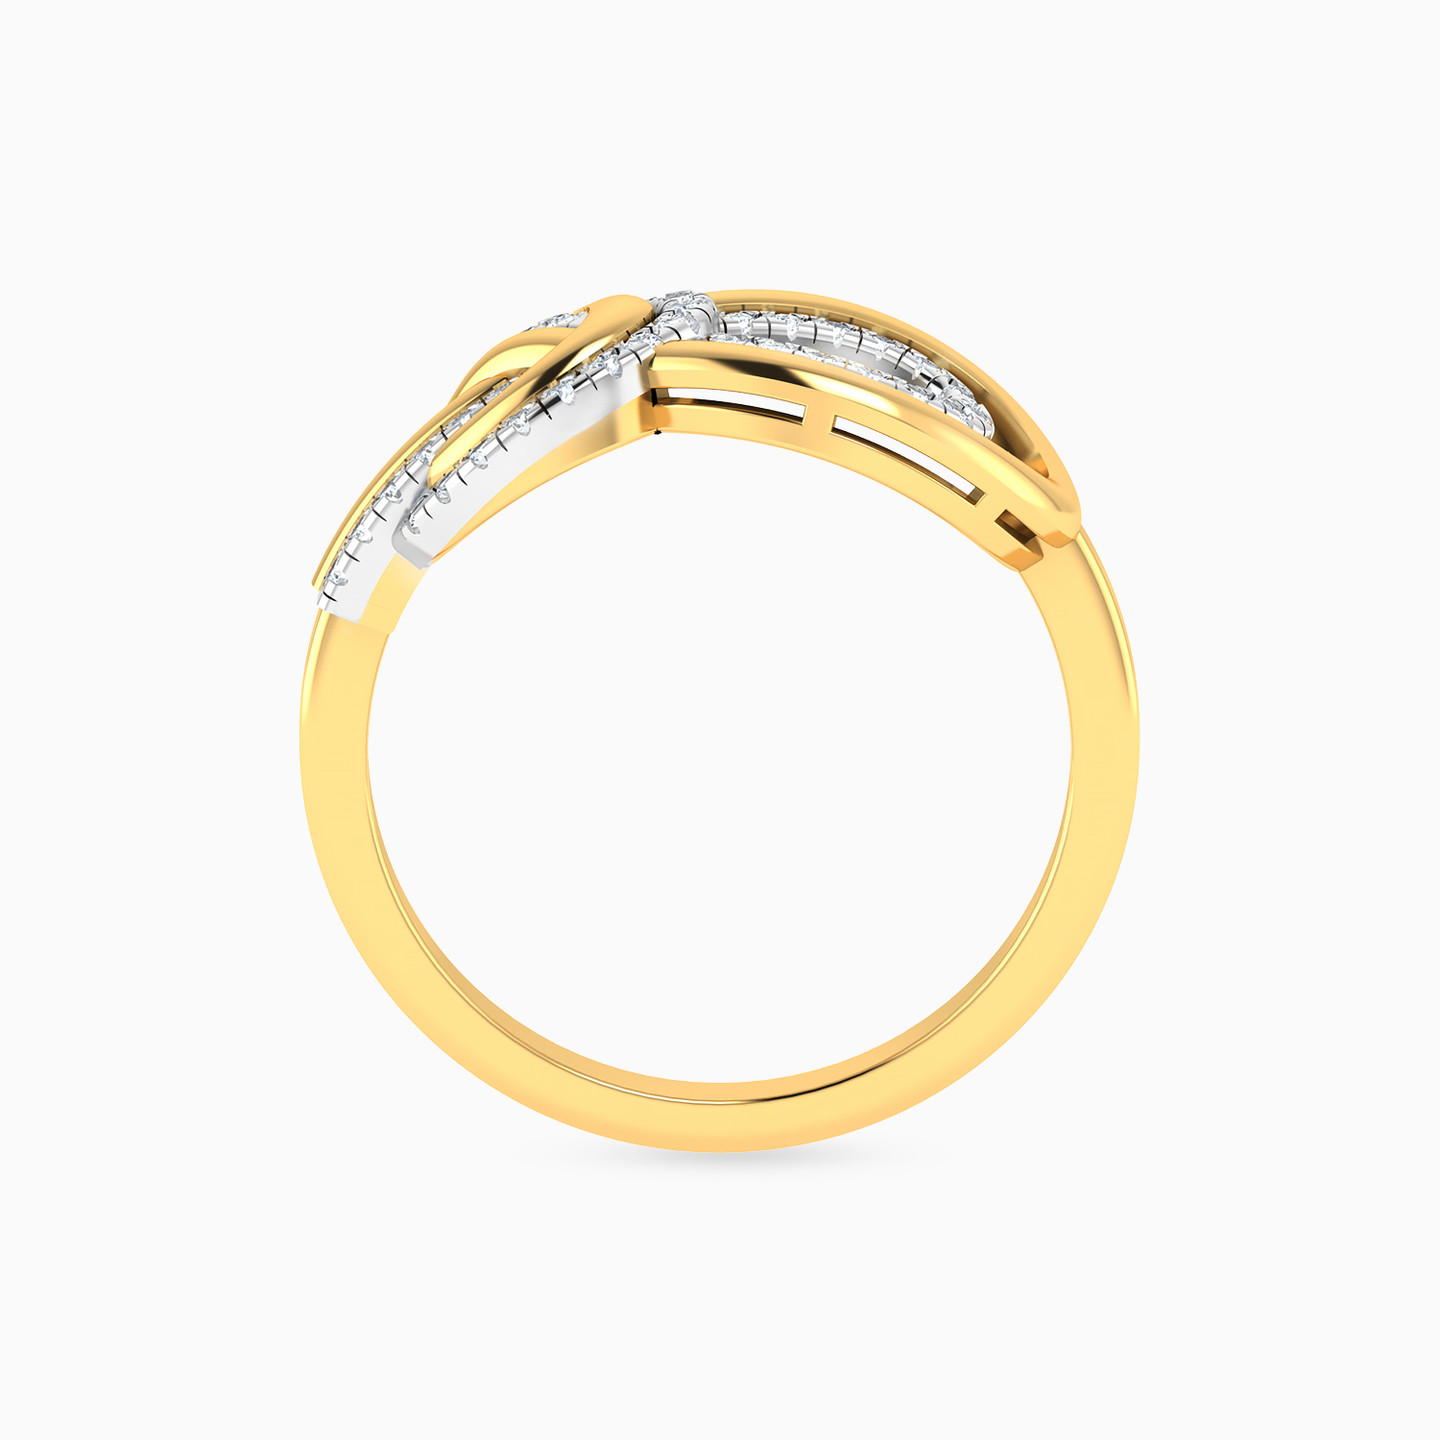 Knot Shaped Diamond Statement Ring in 18K Gold - 3